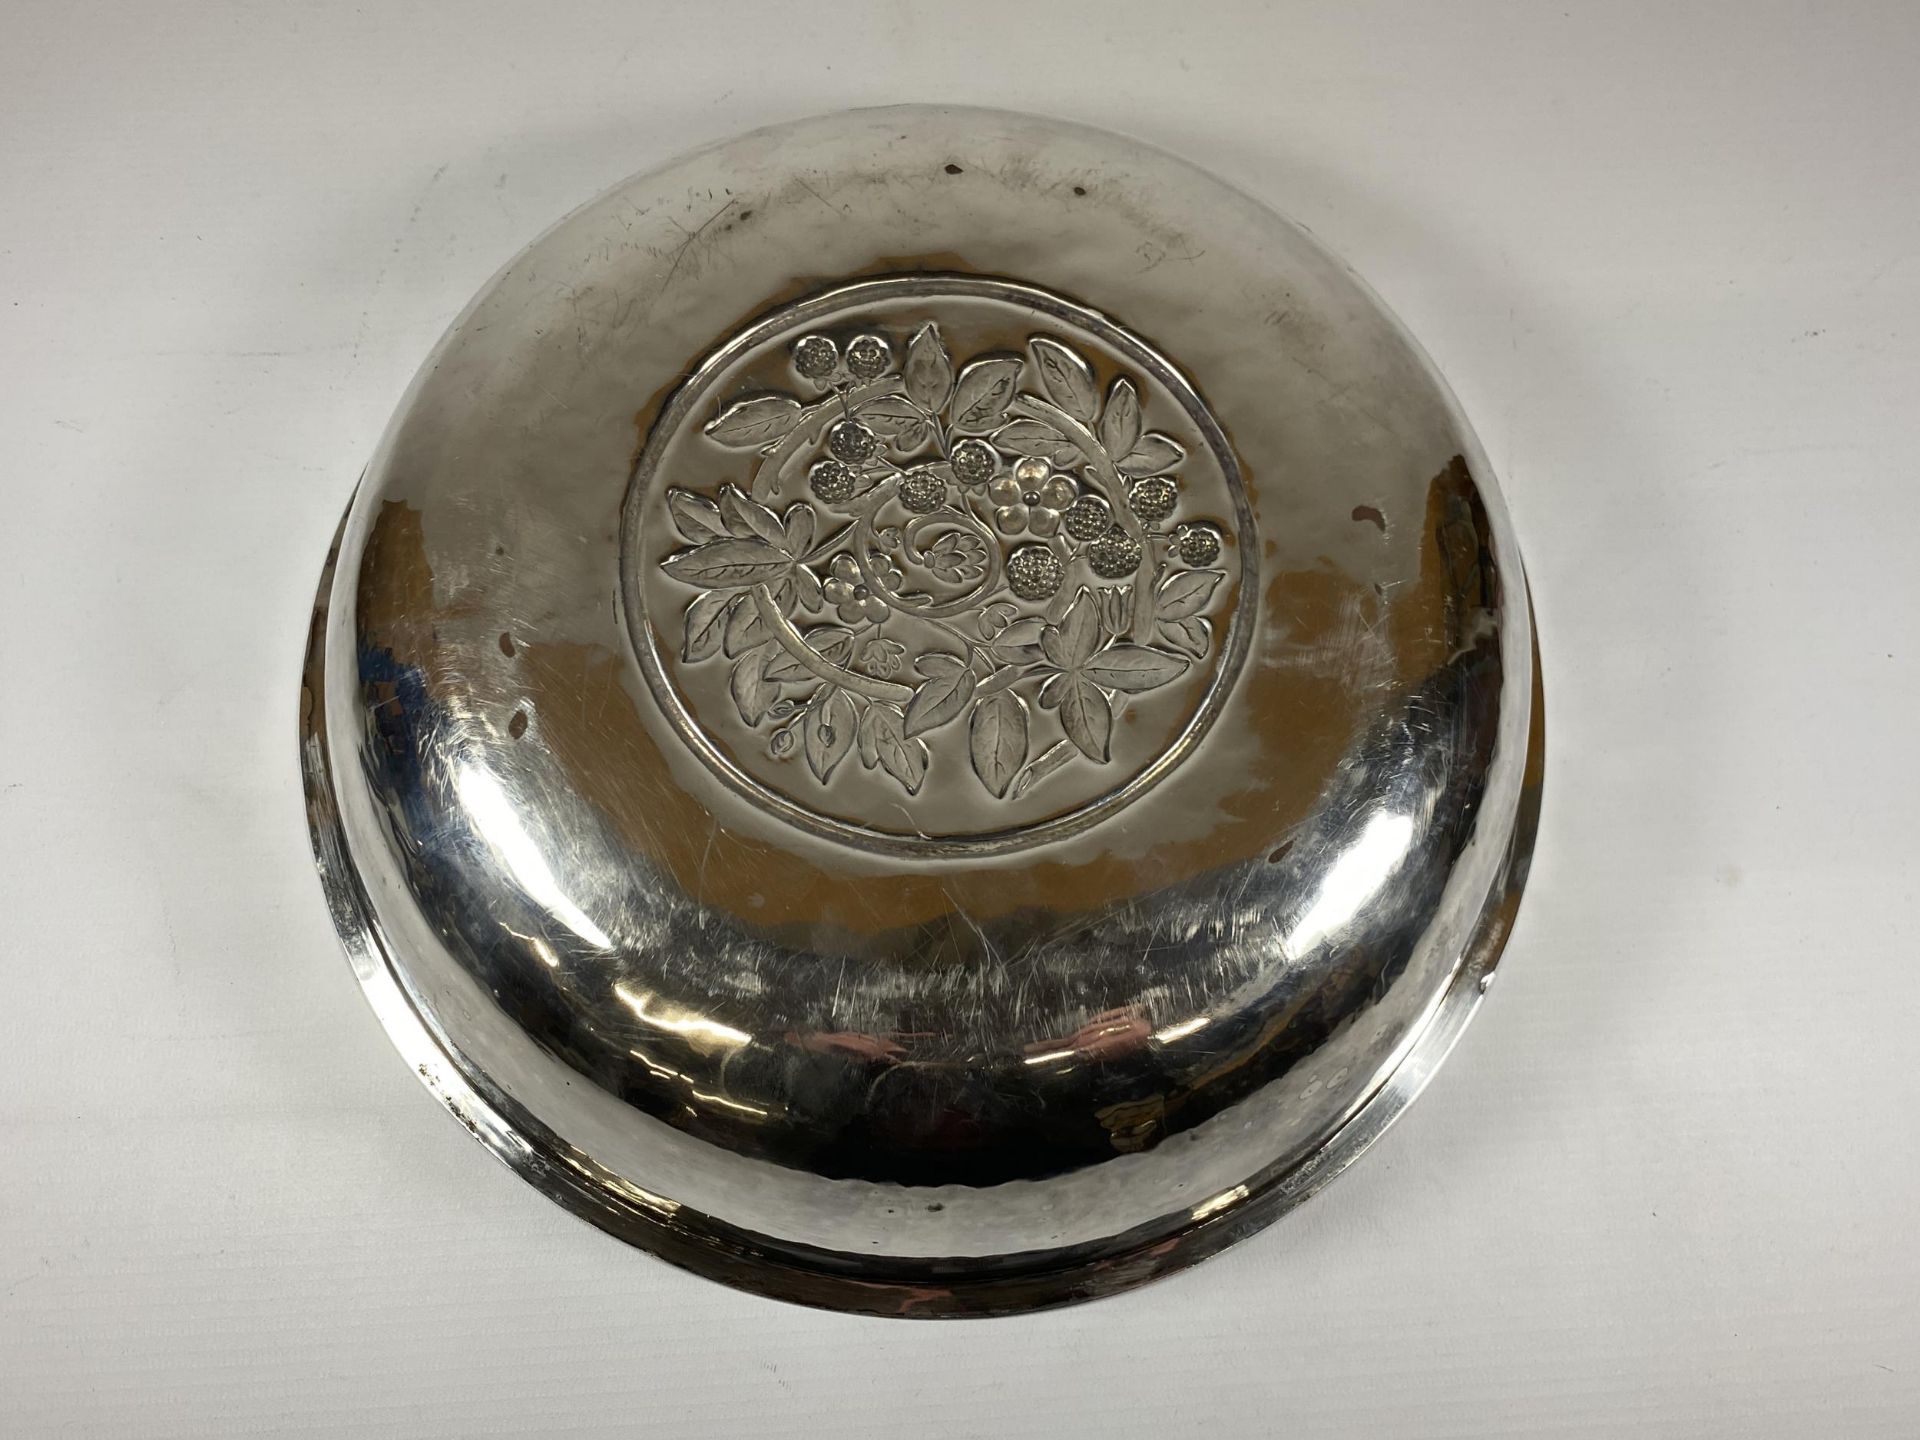 A RARE ART NOUVEAU 'D.S.C.G' SILVER PLATED - DUCHESS SUTHERLAND CRIPPLES GUILD HAMMERED EFFECT - Image 4 of 5